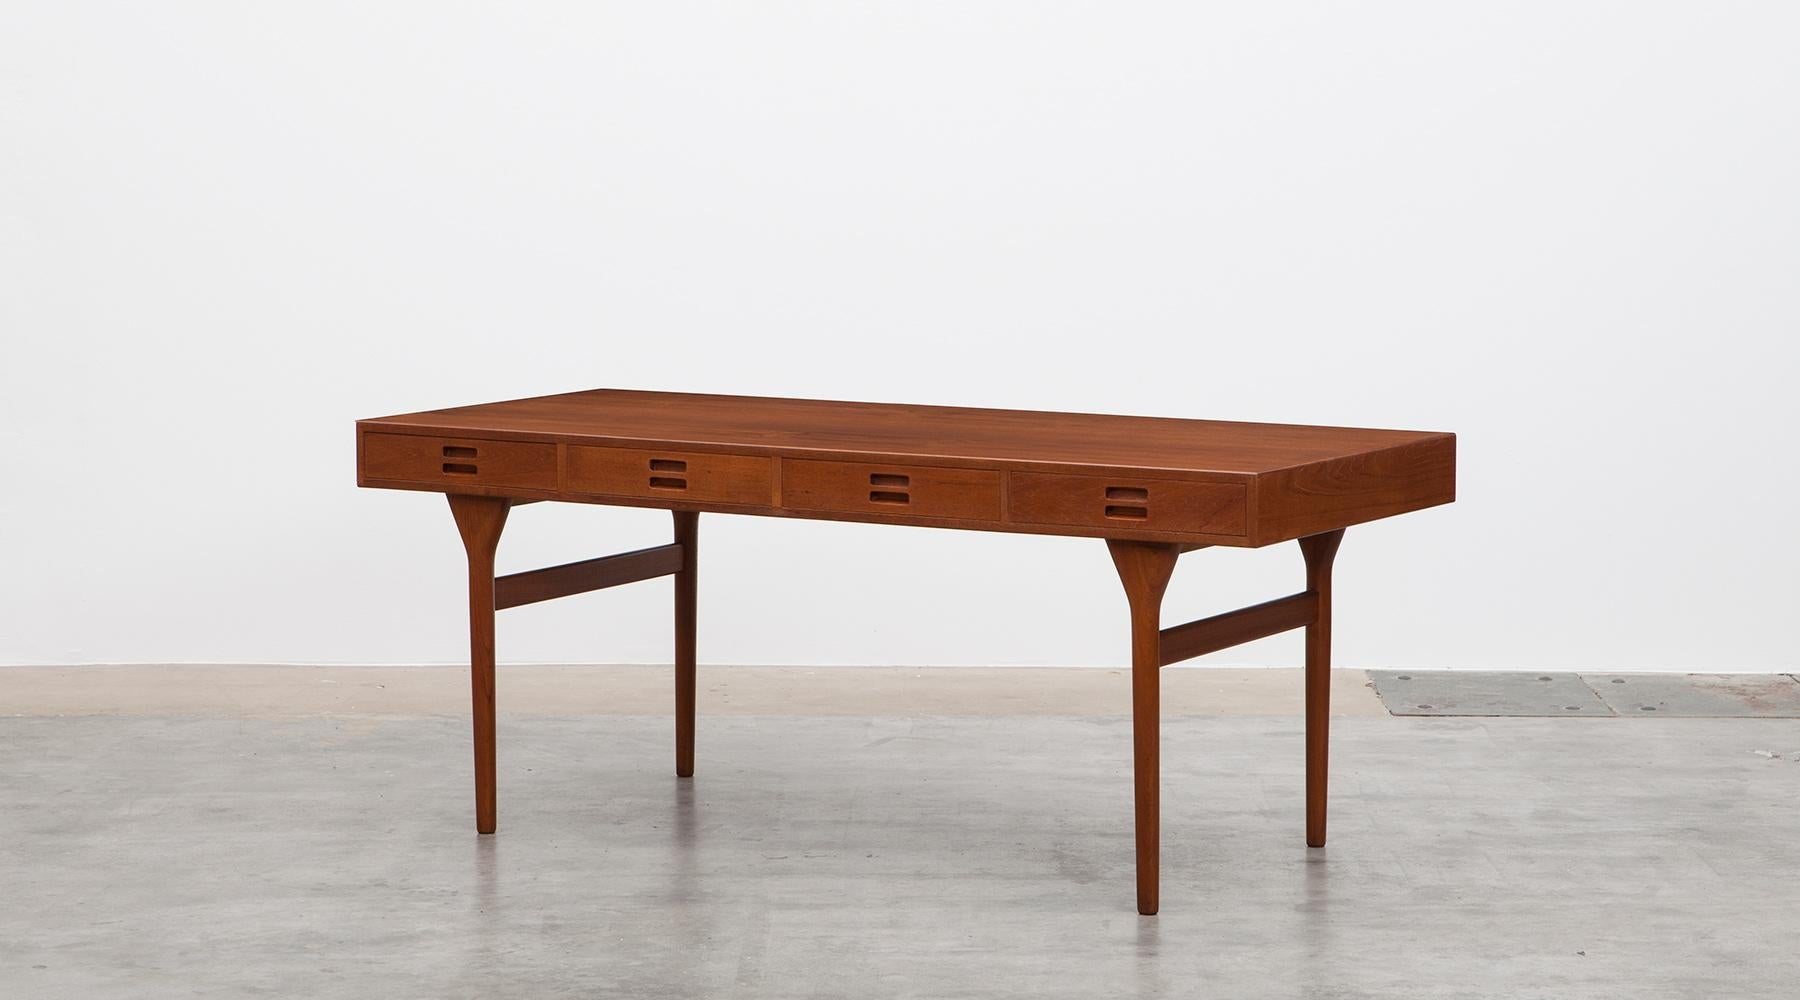 Teak desk by Nanna Ditzel, Denmark, 1960.

Very elegant desk from a rare series designed by Nanna Ditzel from 1960. The writing table in teak is beautifully produced and comes with 4 drawers. Each drawer has a handle which is elaborately inward.